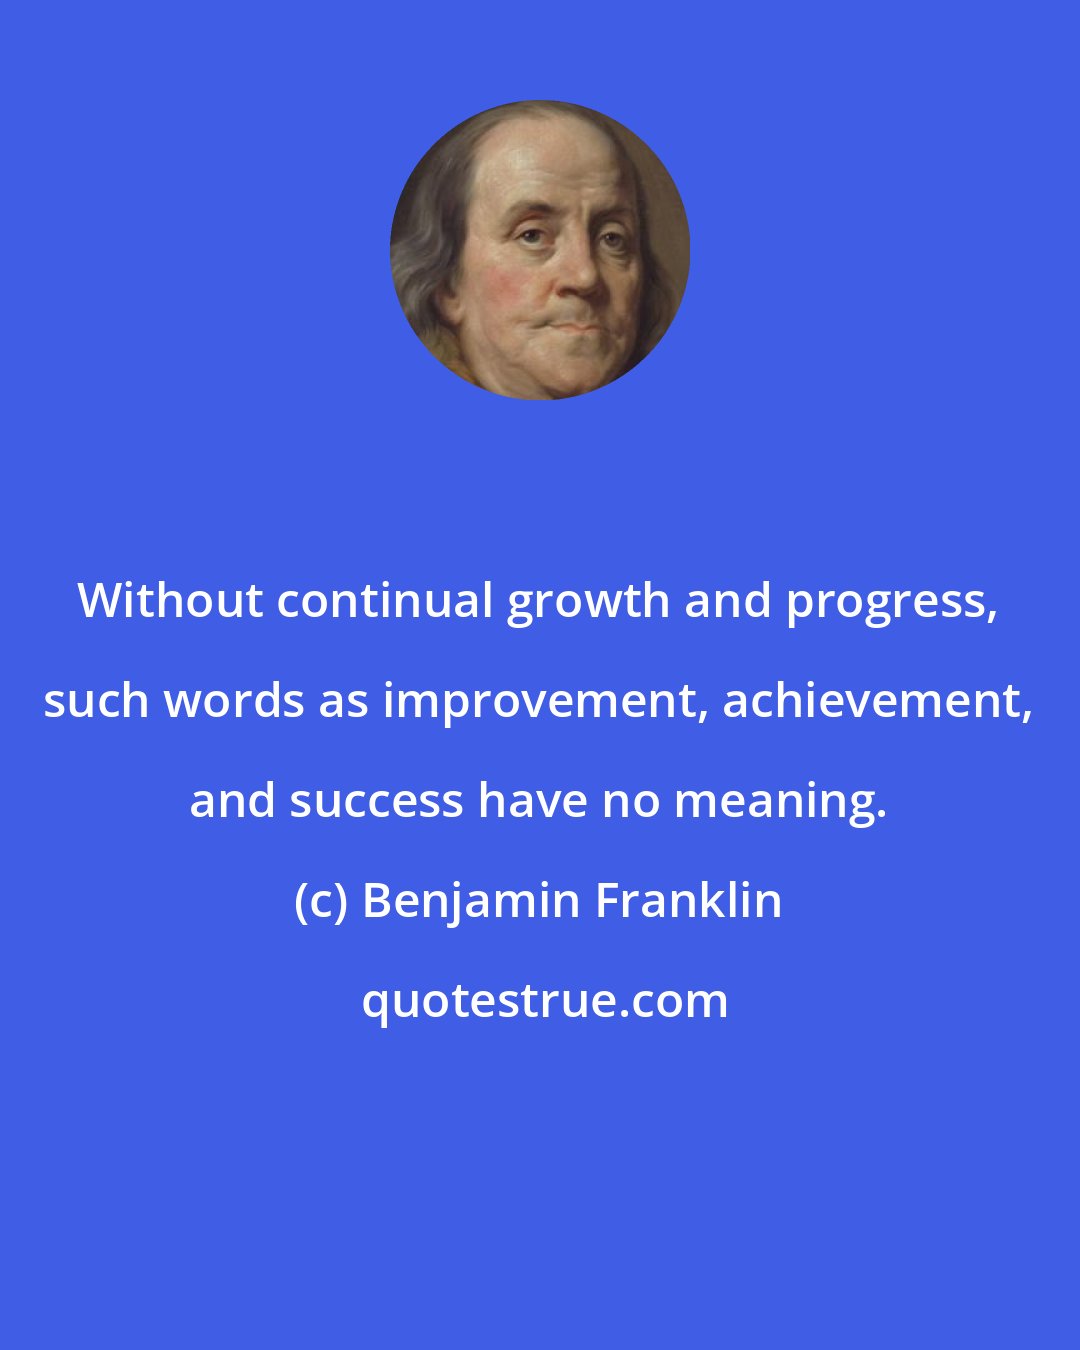 Benjamin Franklin: Without continual growth and progress, such words as improvement, achievement, and success have no meaning.